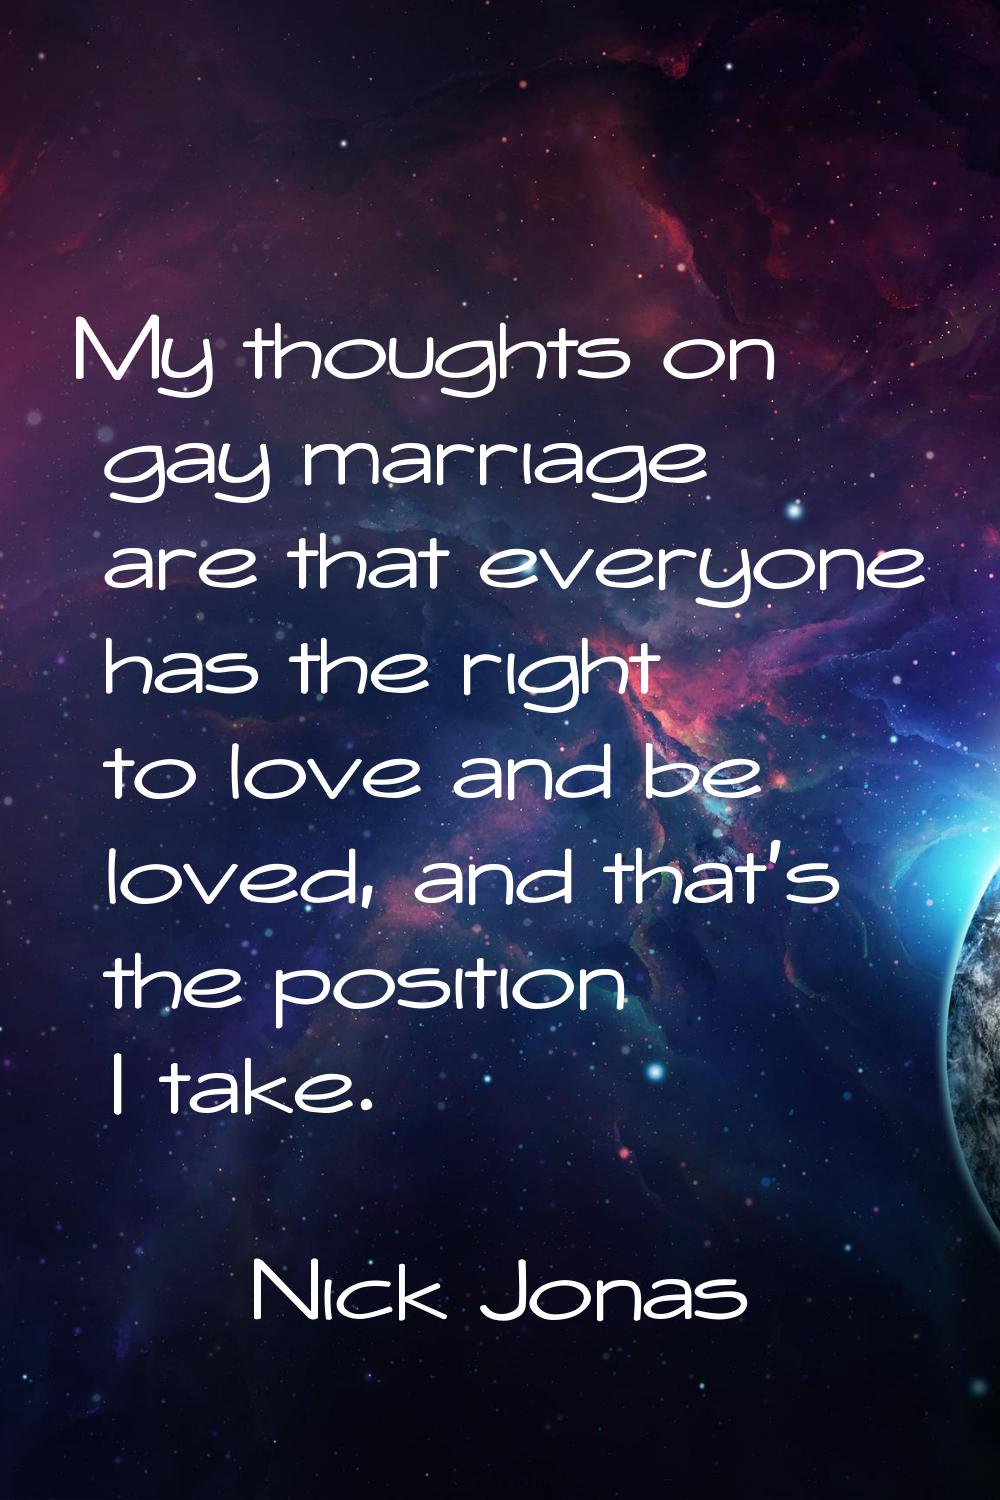 My thoughts on gay marriage are that everyone has the right to love and be loved, and that's the po